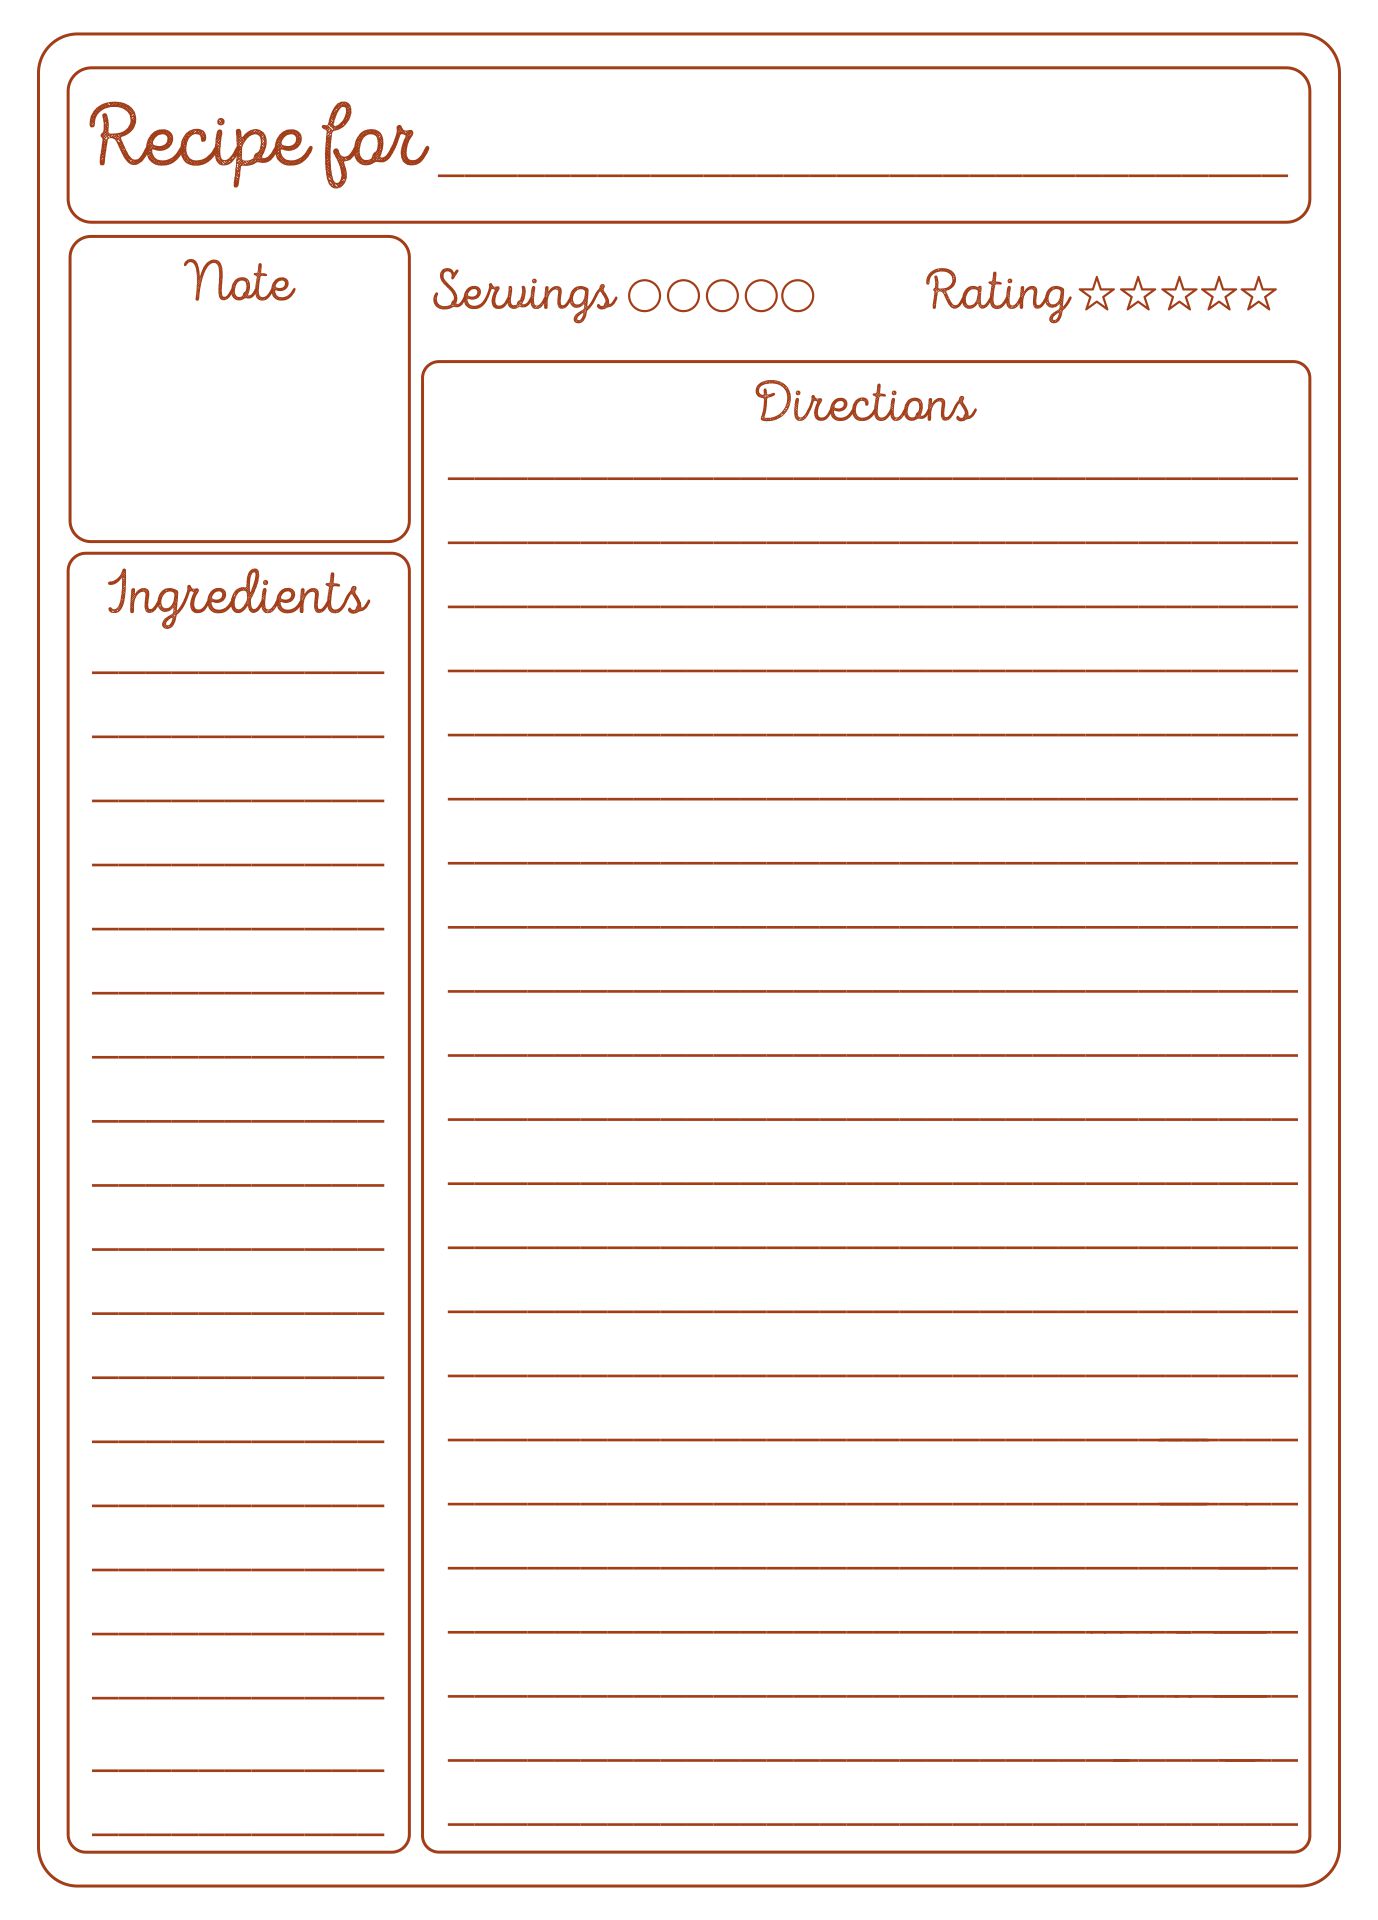 Word Recipe Card Template 4X6 from www.printablee.com